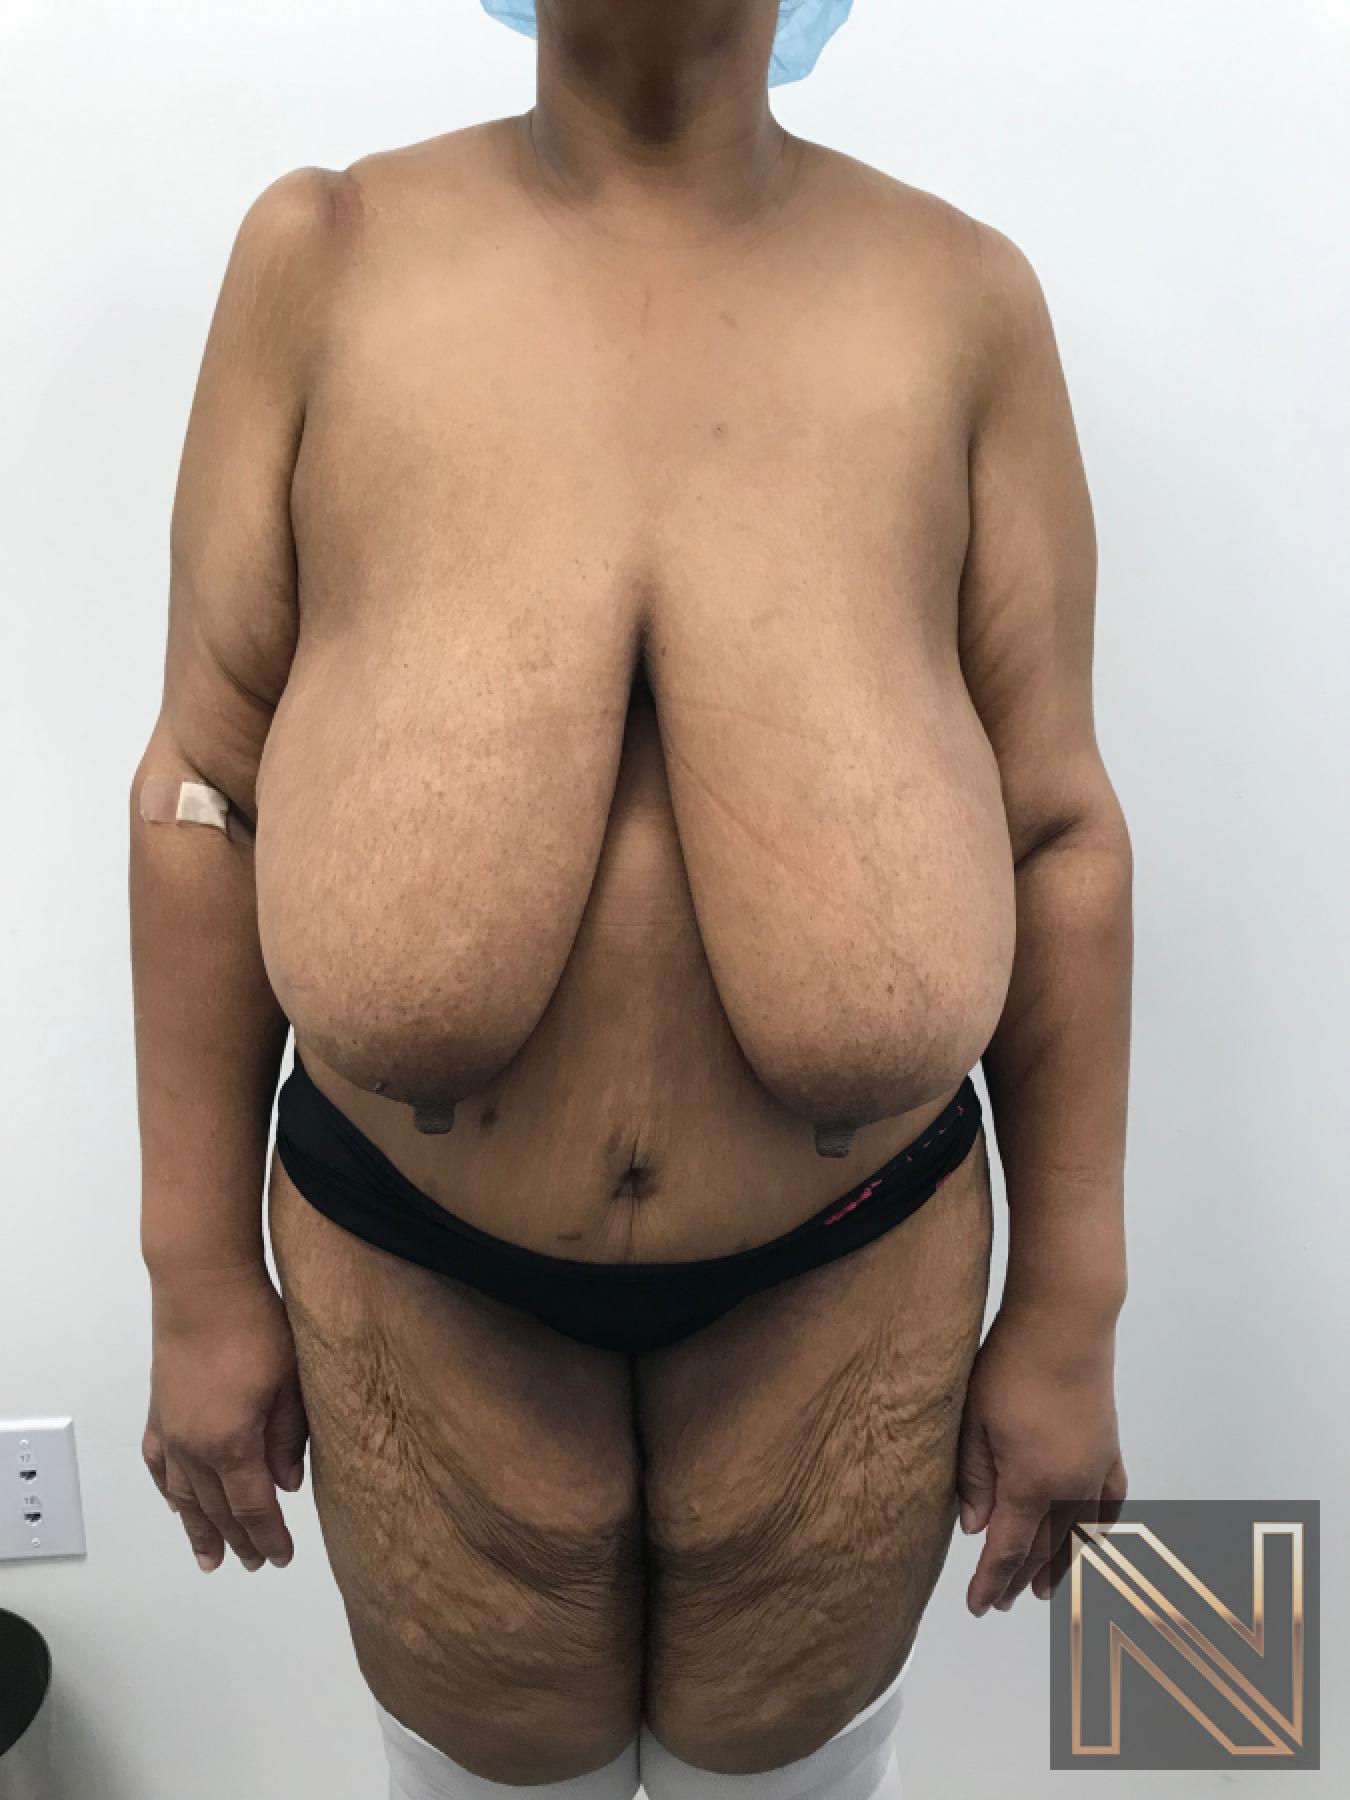 Breast Reduction: Patient 2 - Before 